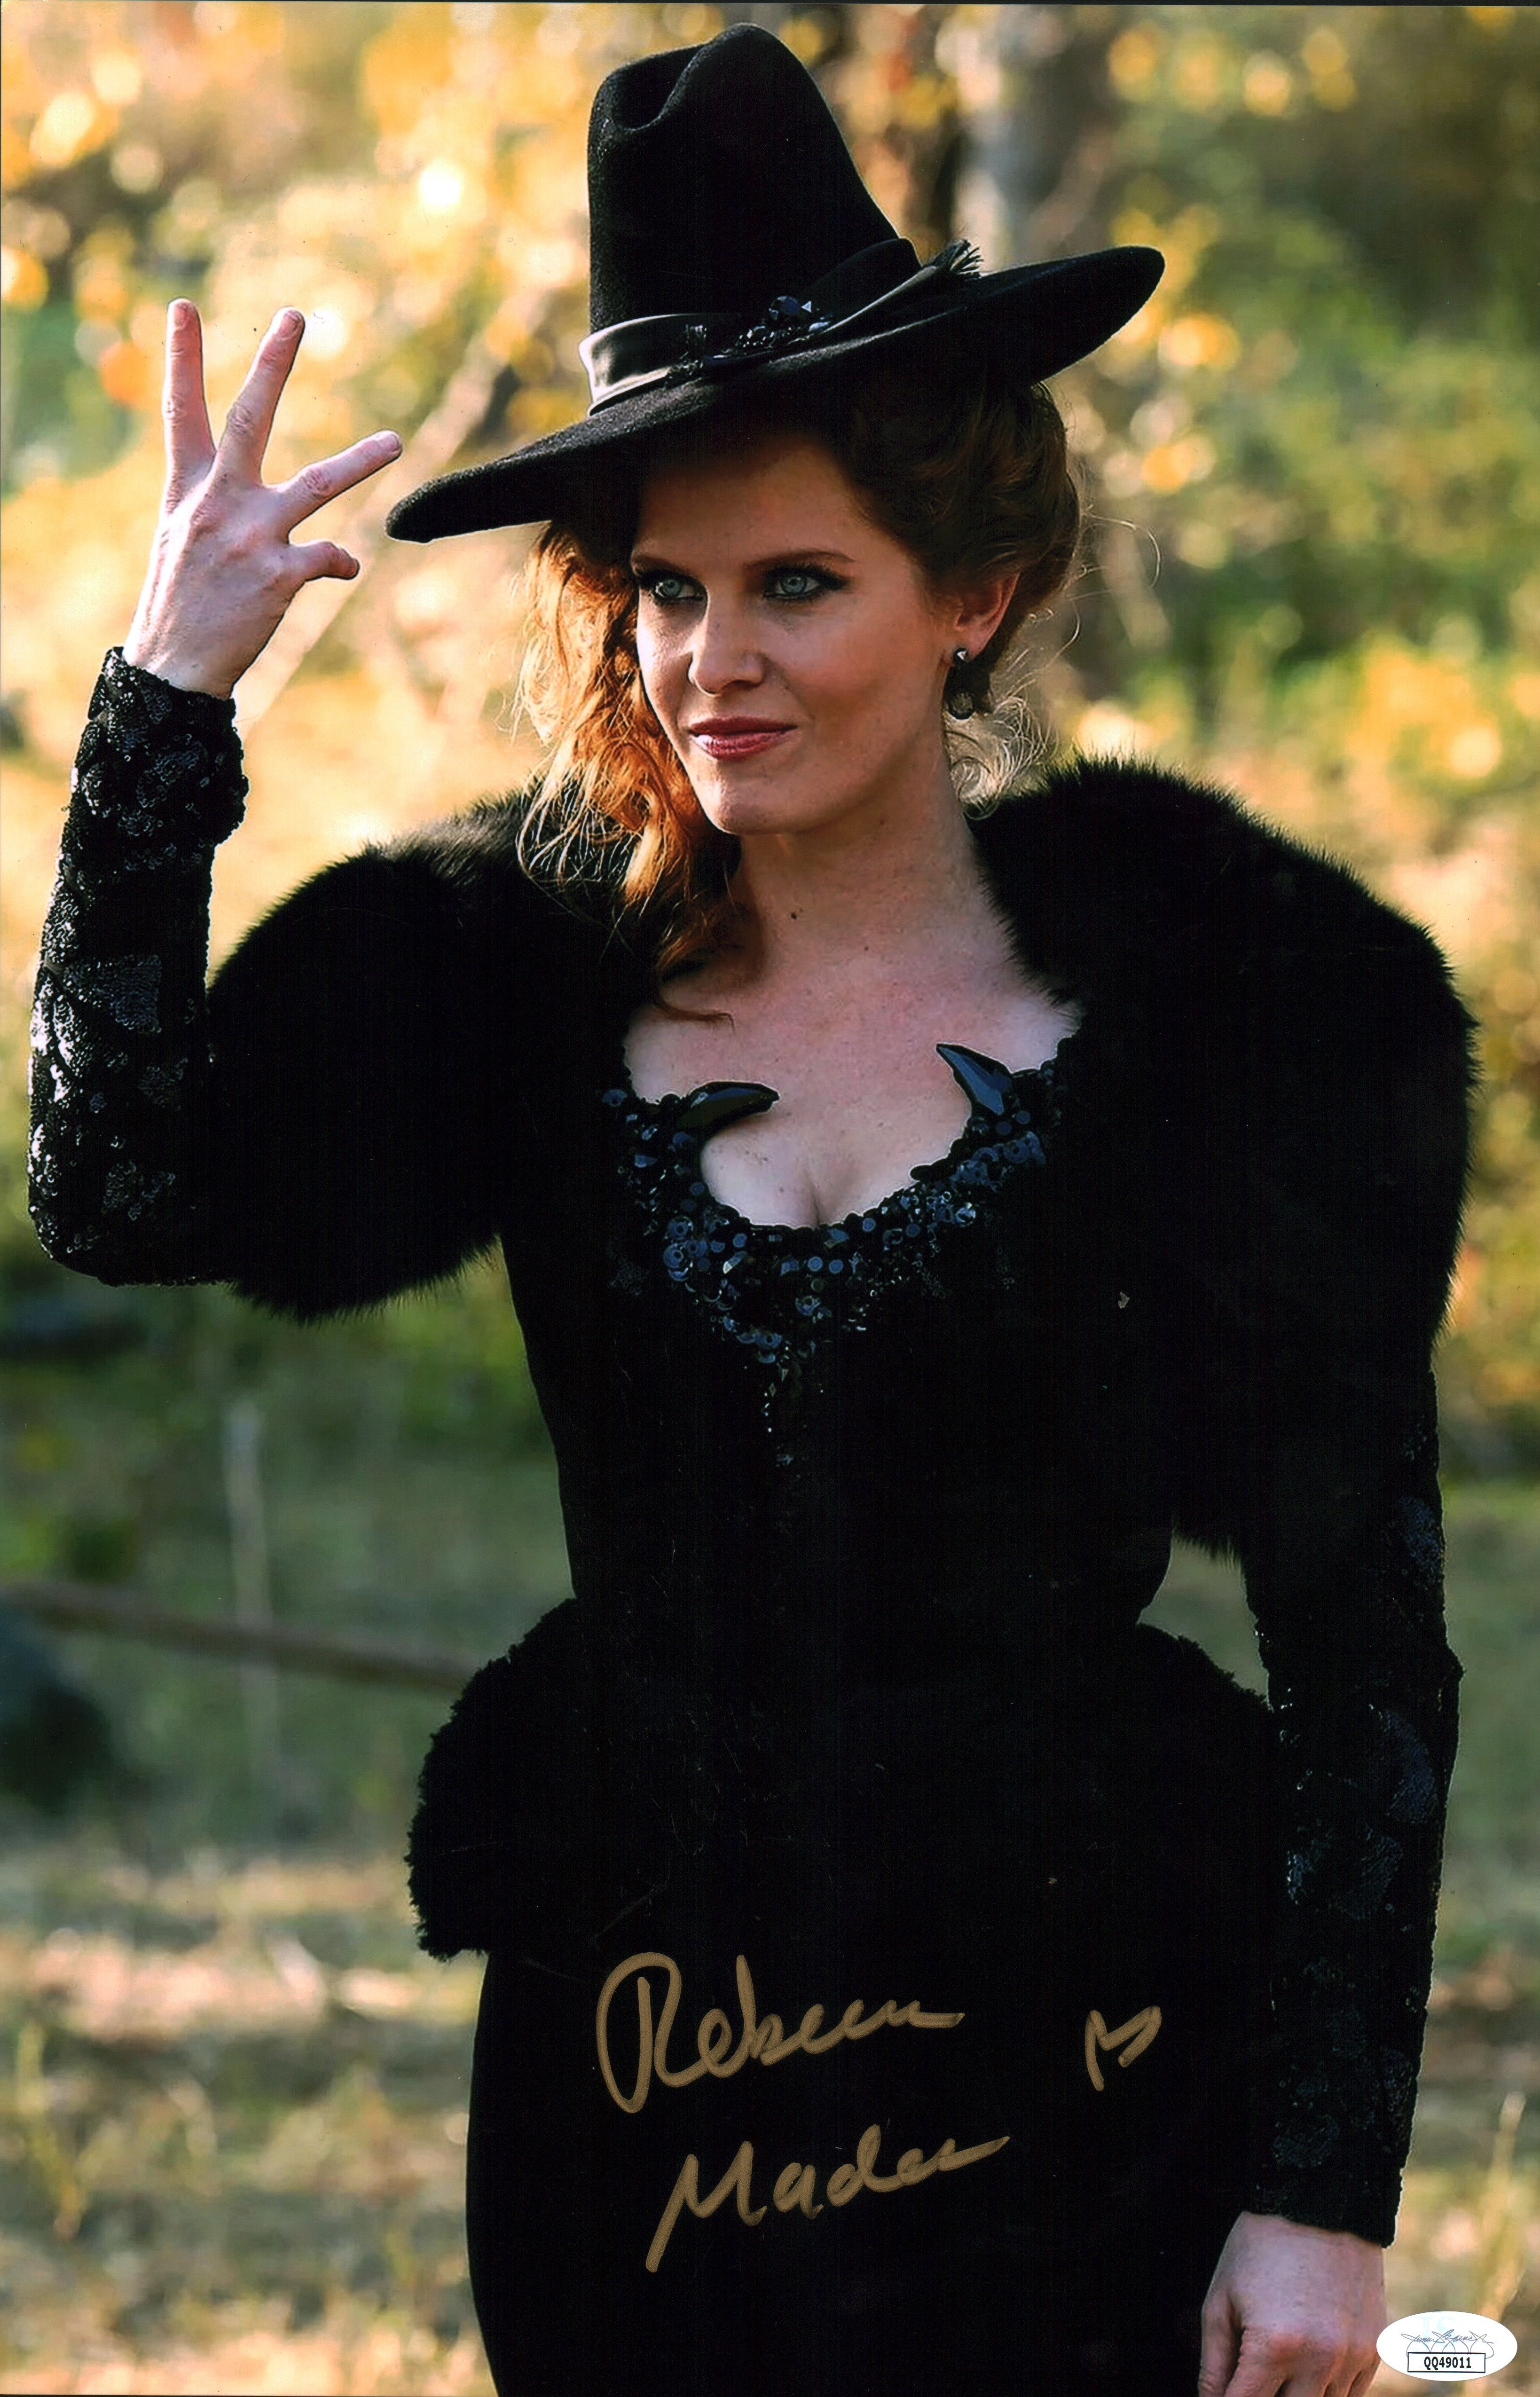 Rebecca Mader Once Upon A Time OUAT 11x17 Photo Poster Signed Autographed JSA COA Certified Auto